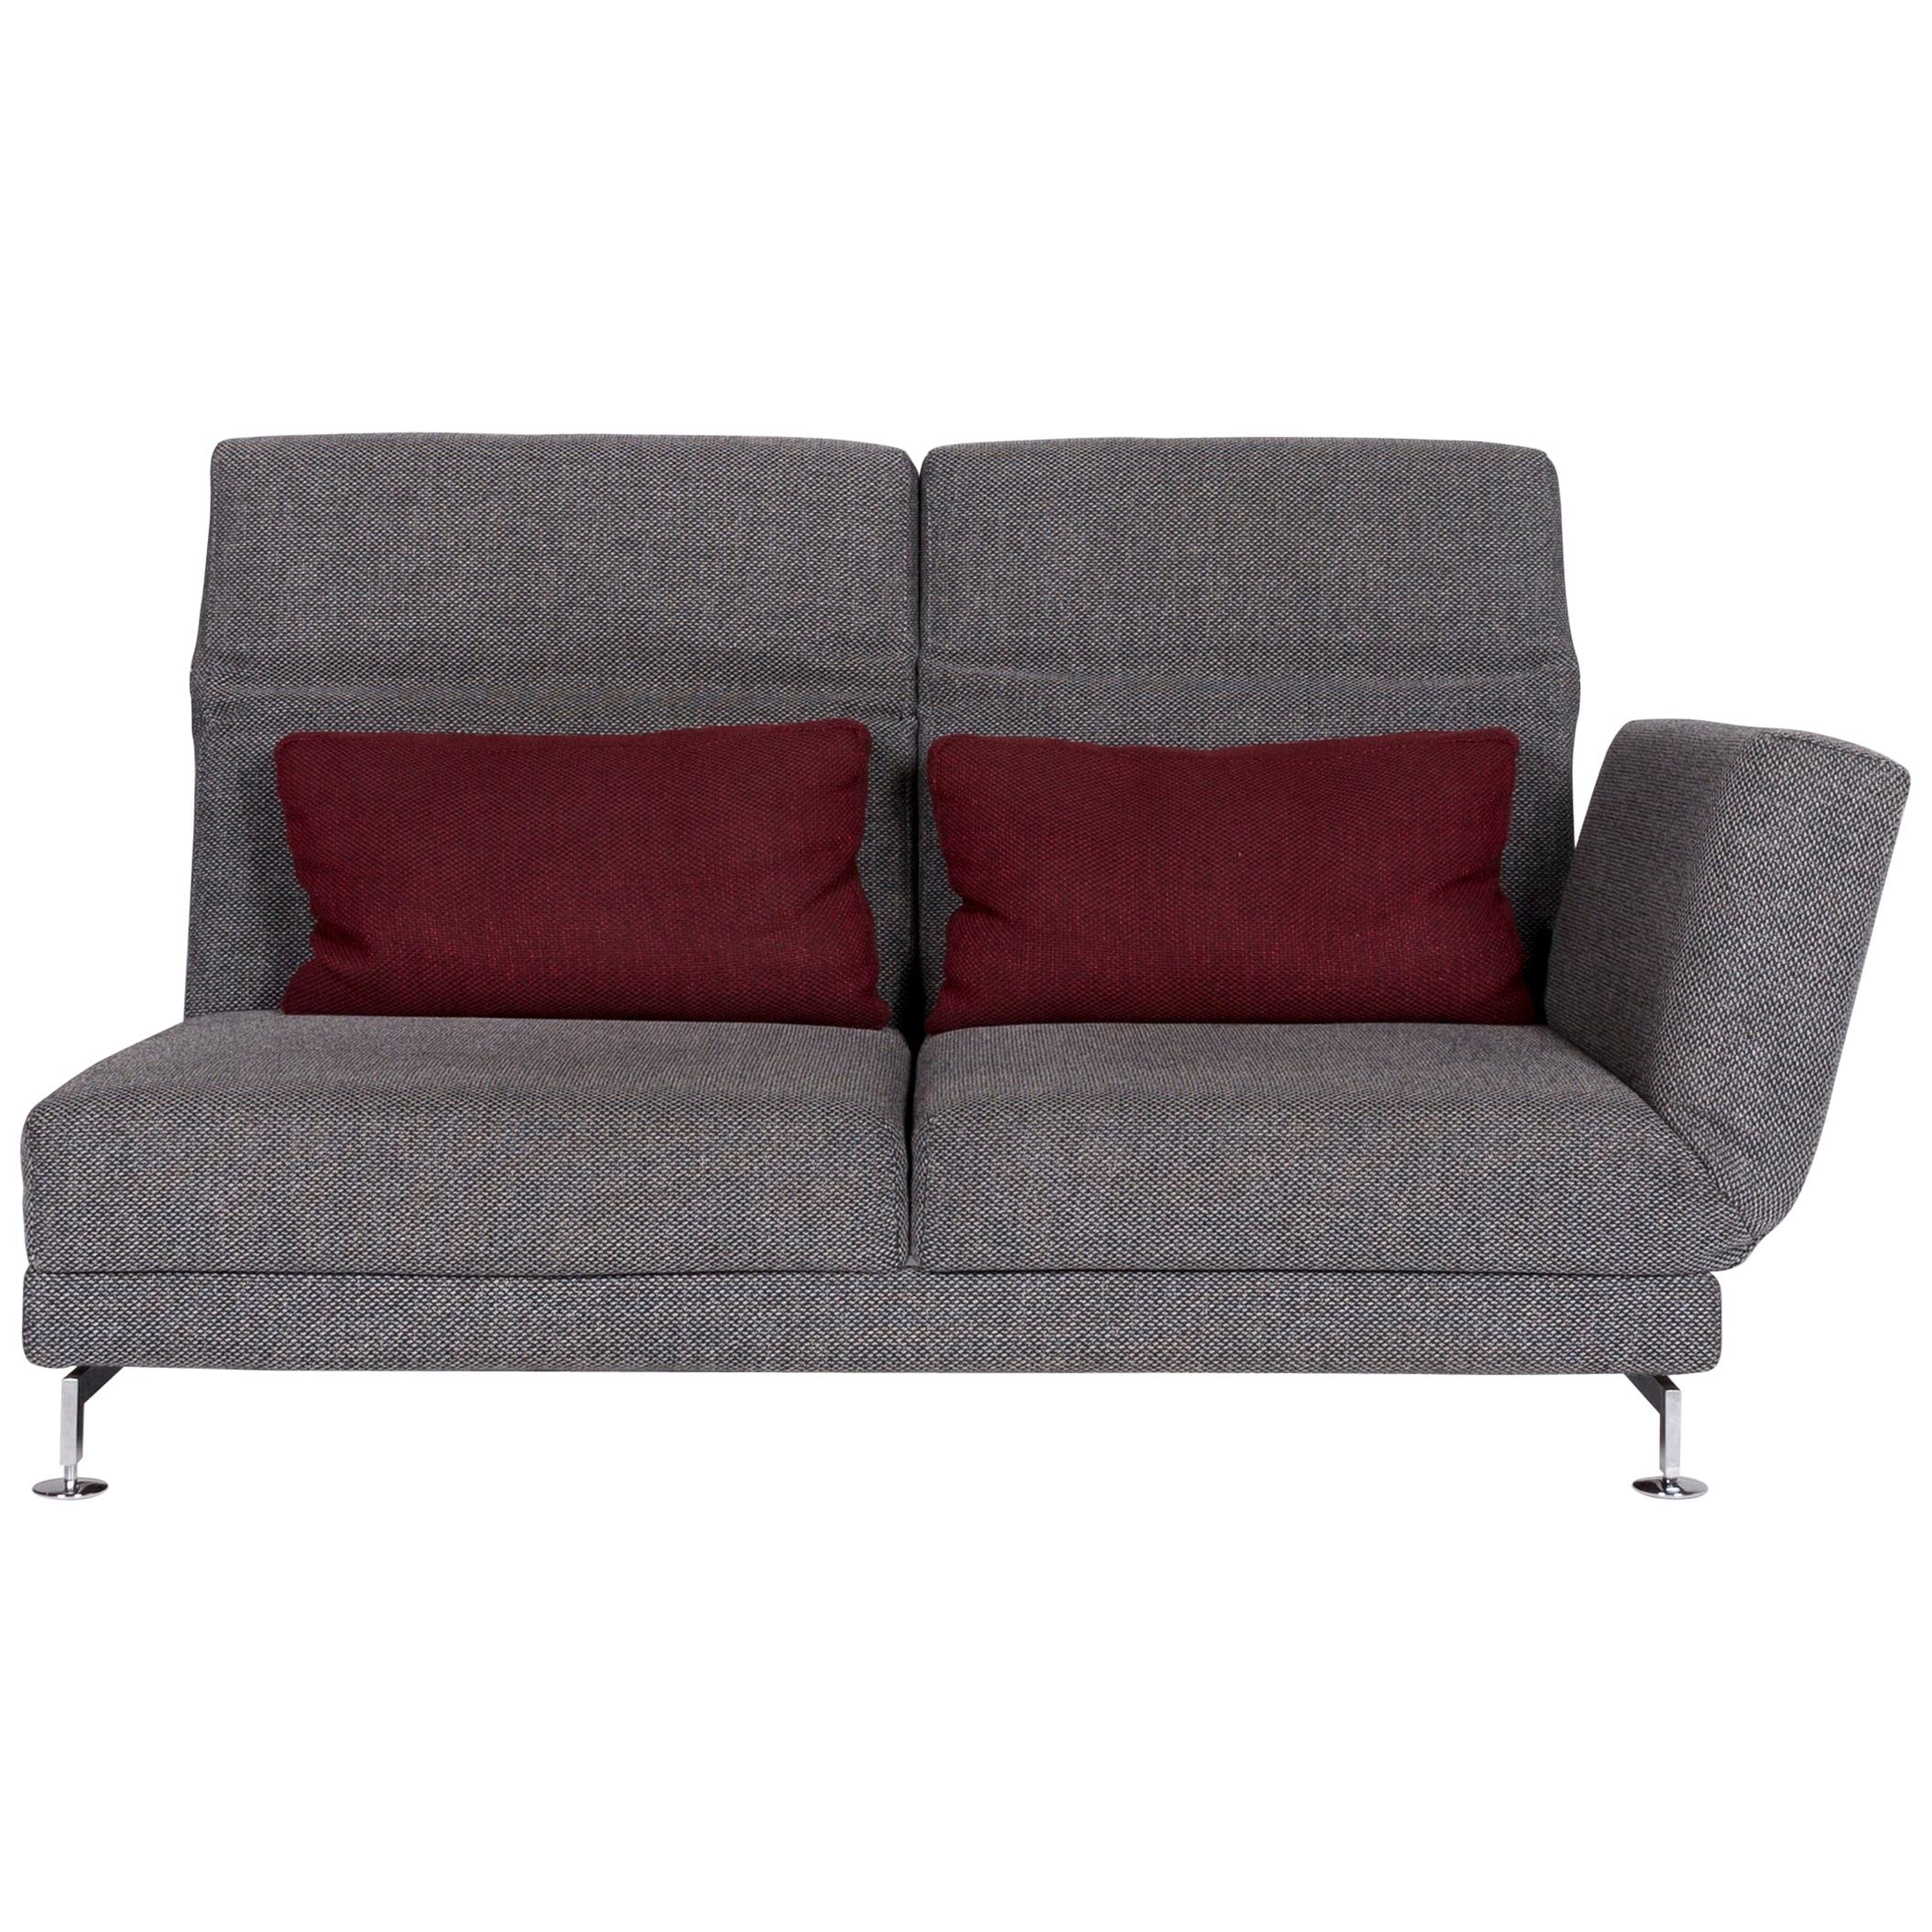 and Sippold Moule Sofa Grau Zweisitzer Relaxfunktion Funktion Couch For Sale at 1stDibs | sofa stoff, sofa zweisitzer, designer sofas